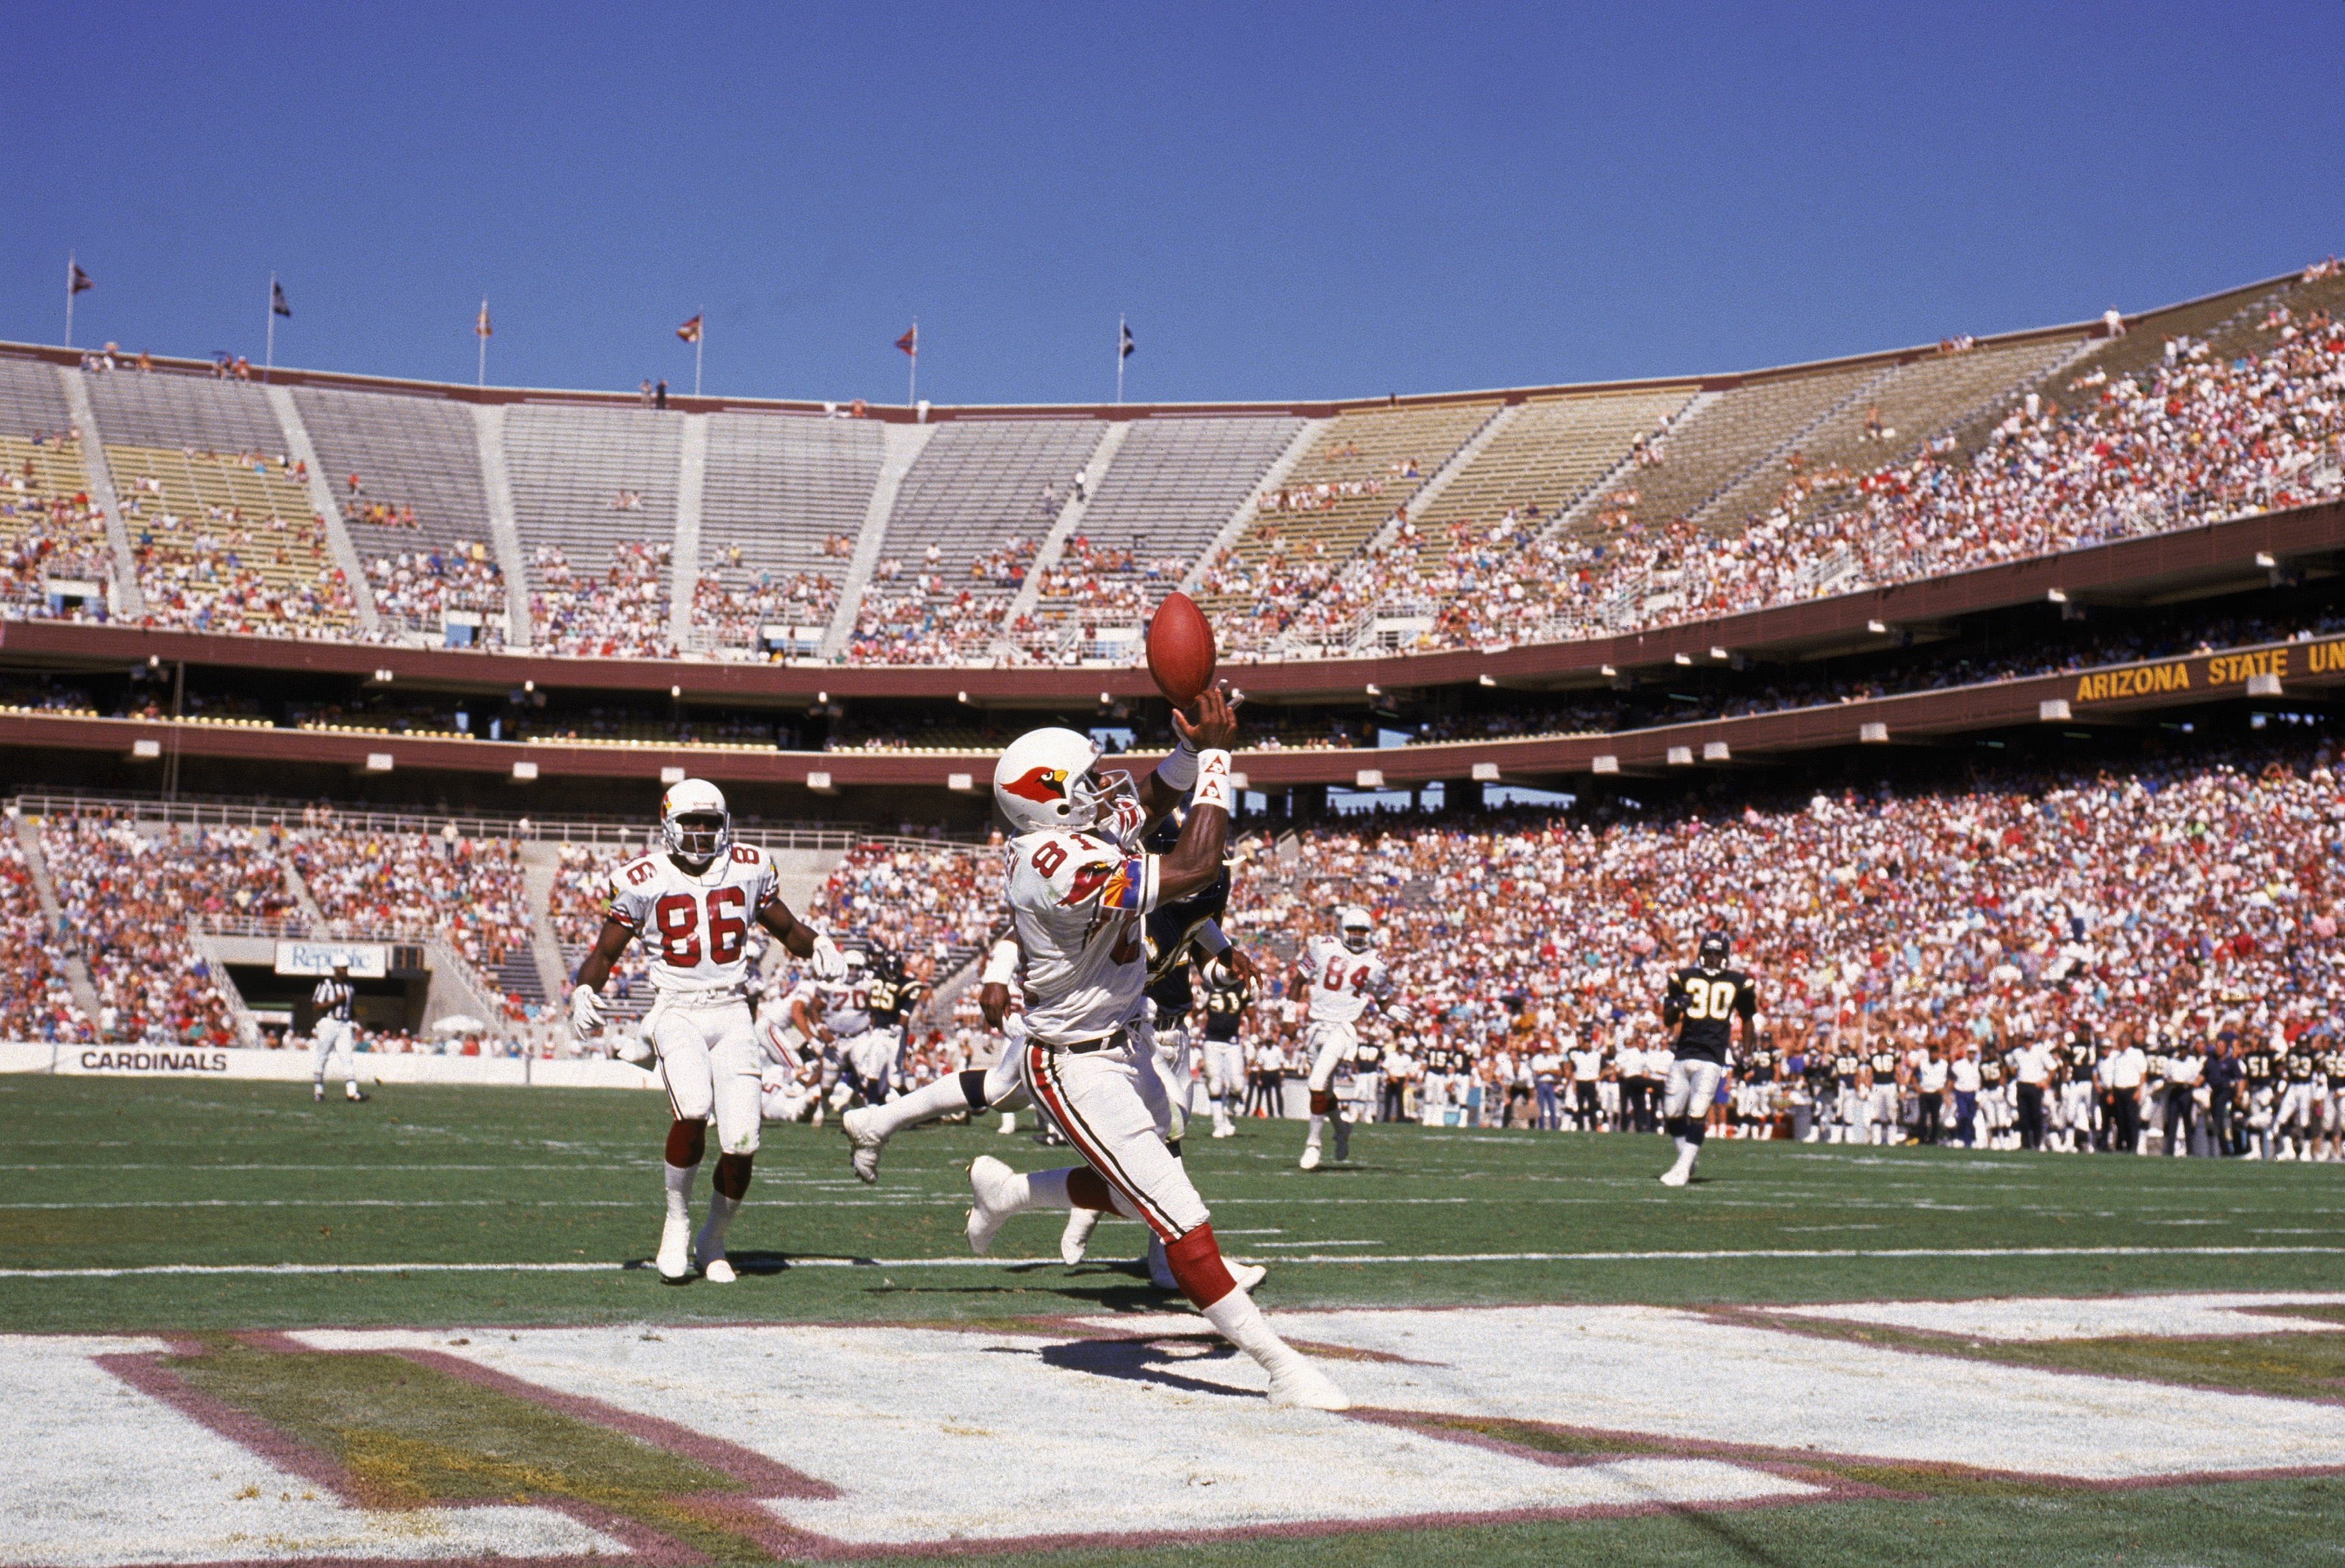 Wide receiver Roy Green #81 of the Phoenix Cardinals catches a pass in the endzone during an NFL game against the San Diego Chargers on Oc. 1, 1989 at Sun Devil Stadium in Phoenix. (Stephen Dunn—Getty Images)